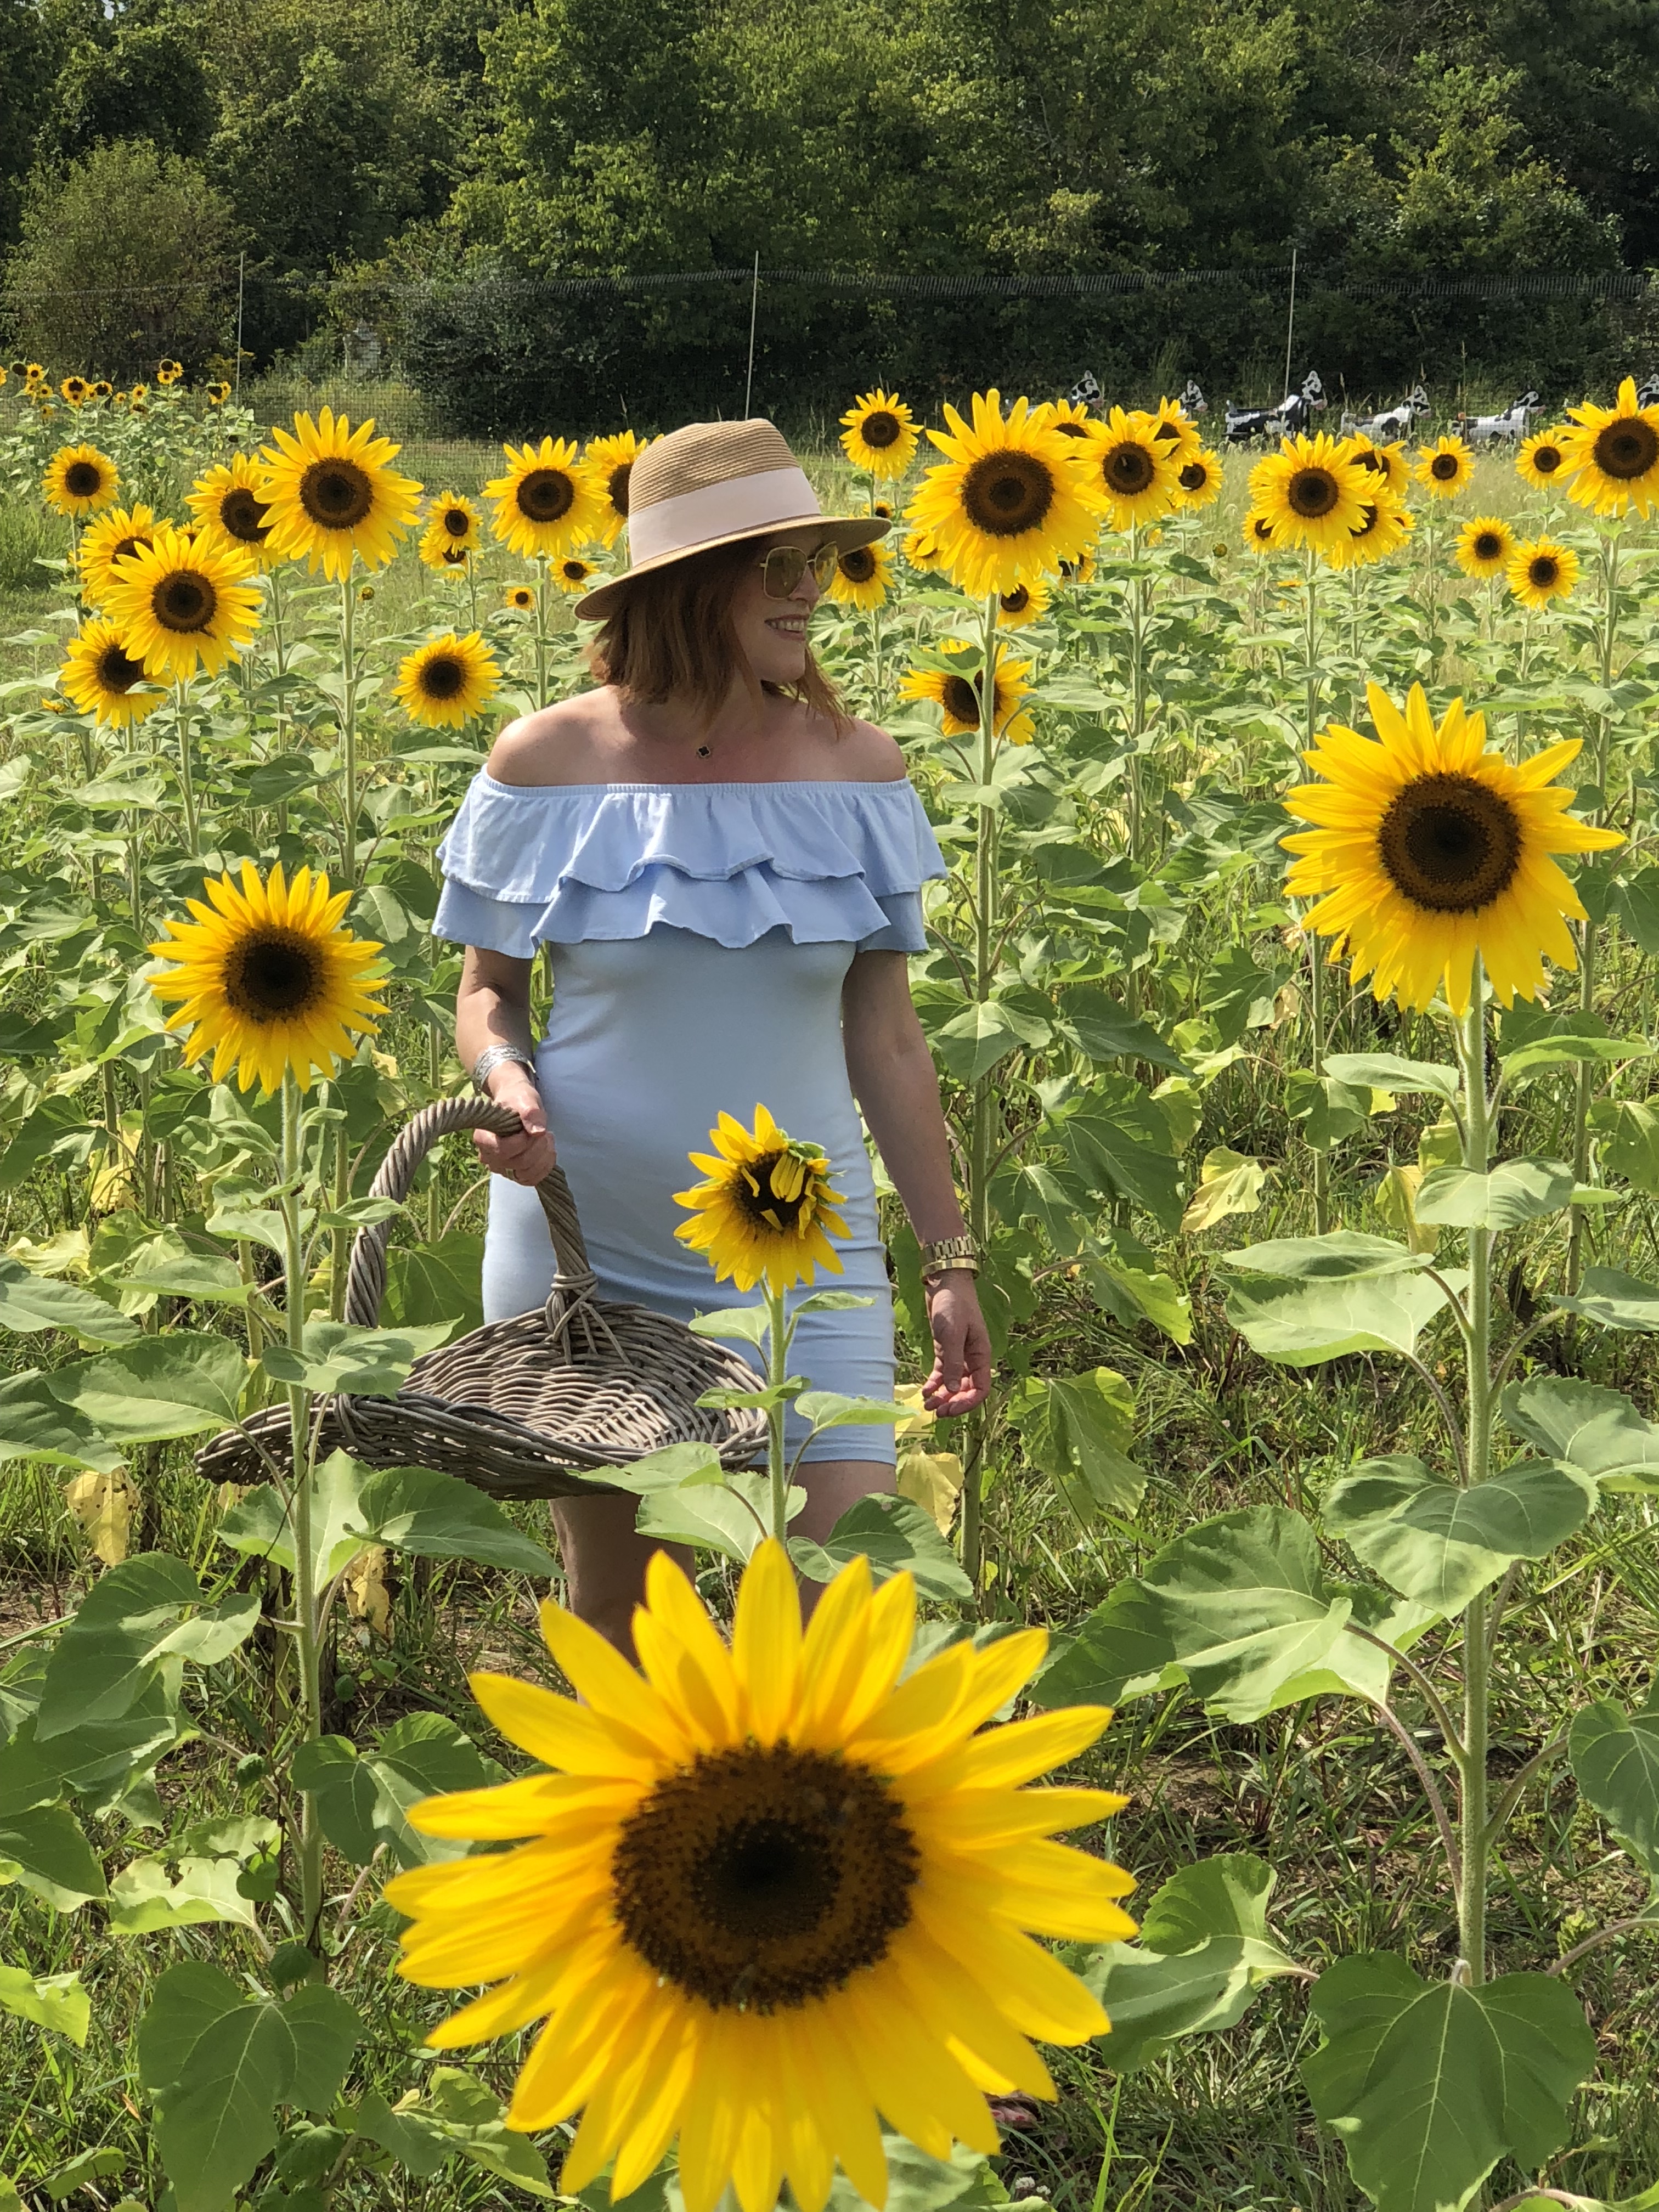 Sunflowers Picking & Thoughts on Self-Care